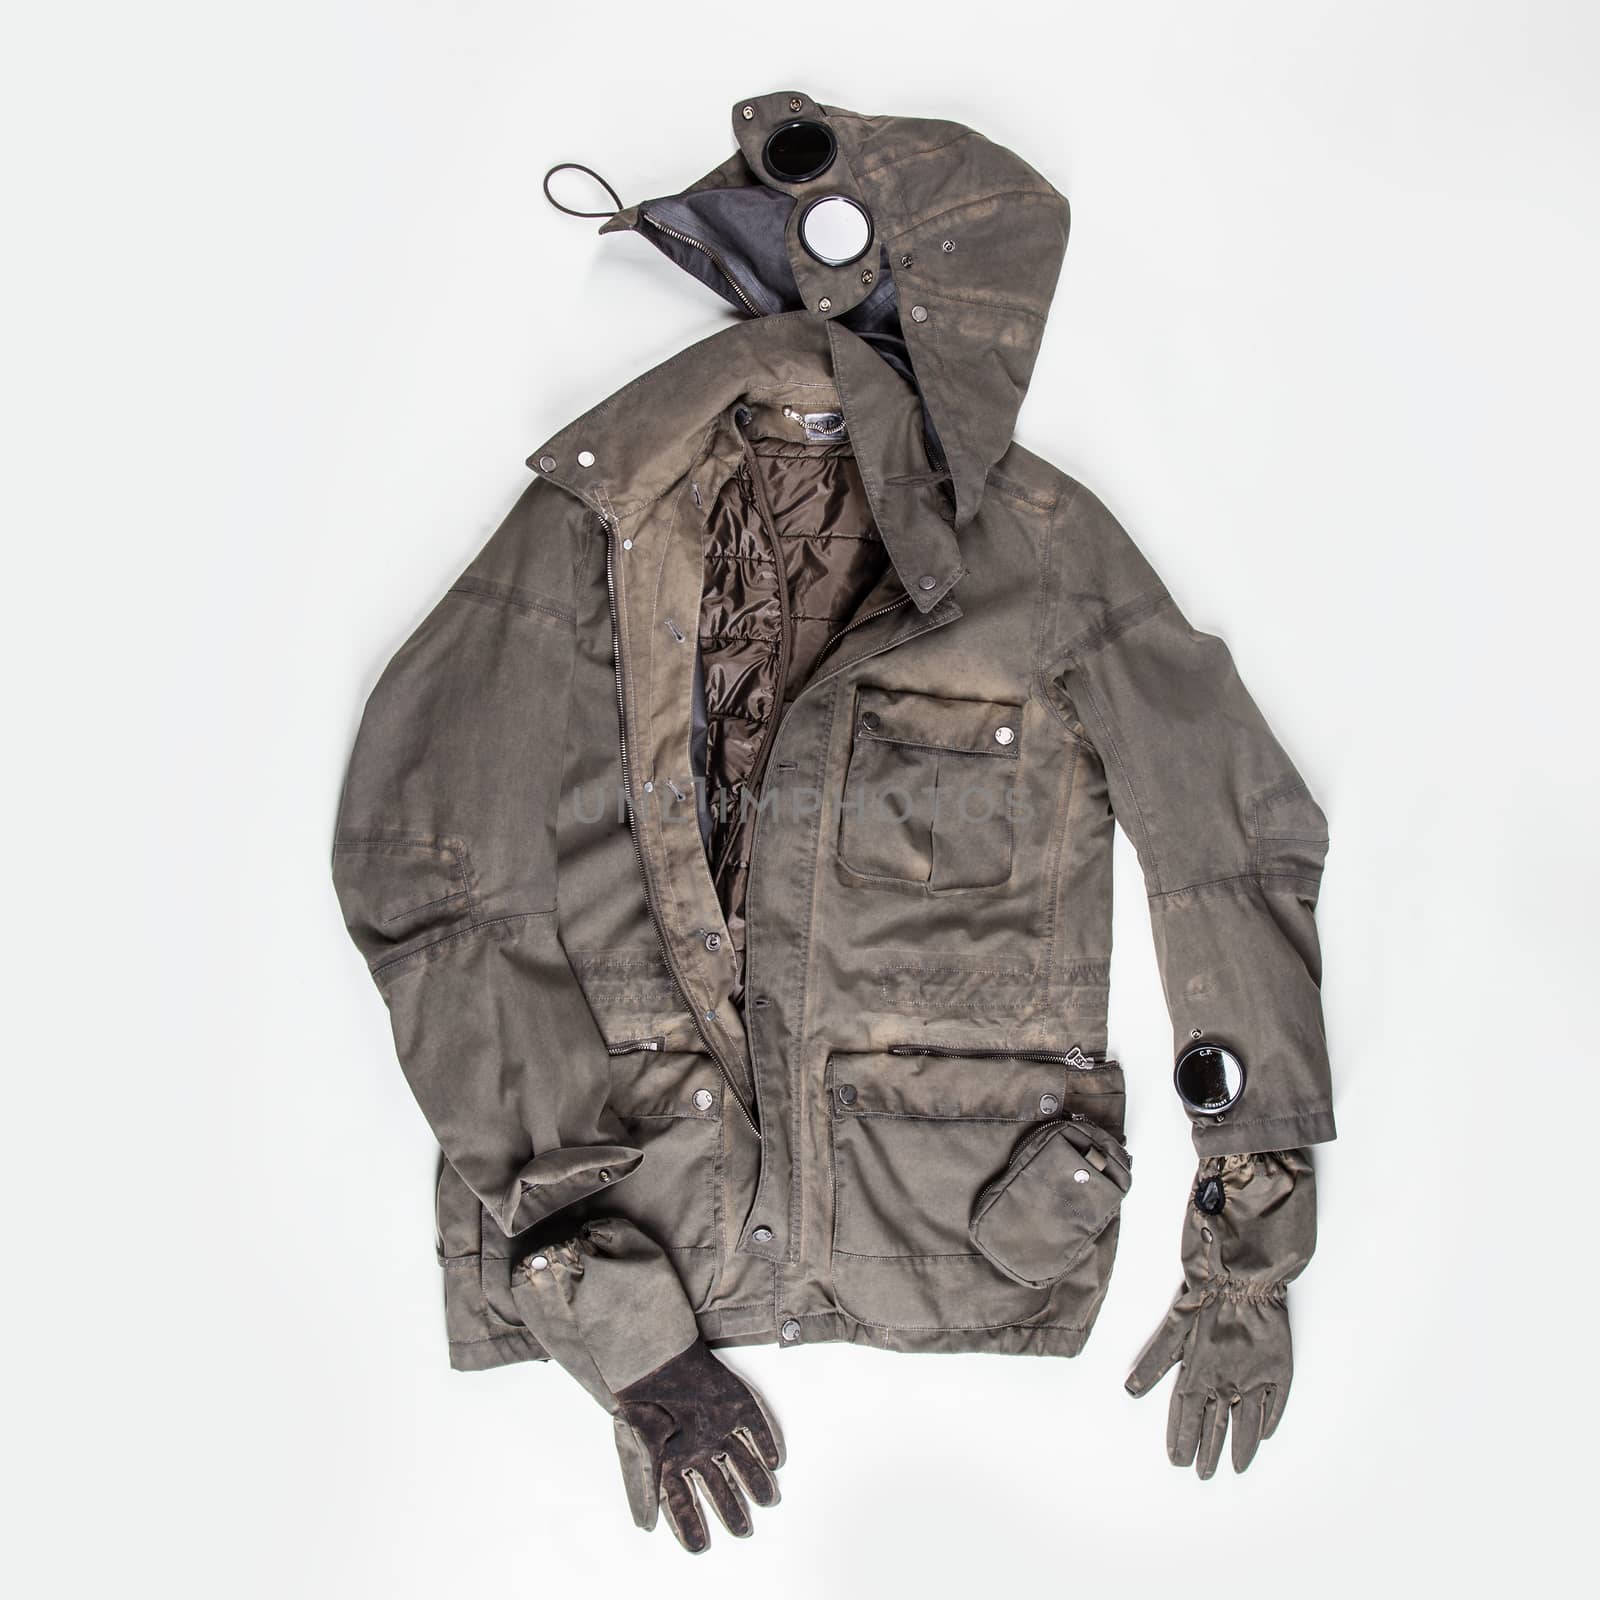 Parka Jacket on White Background. Hipster clothes